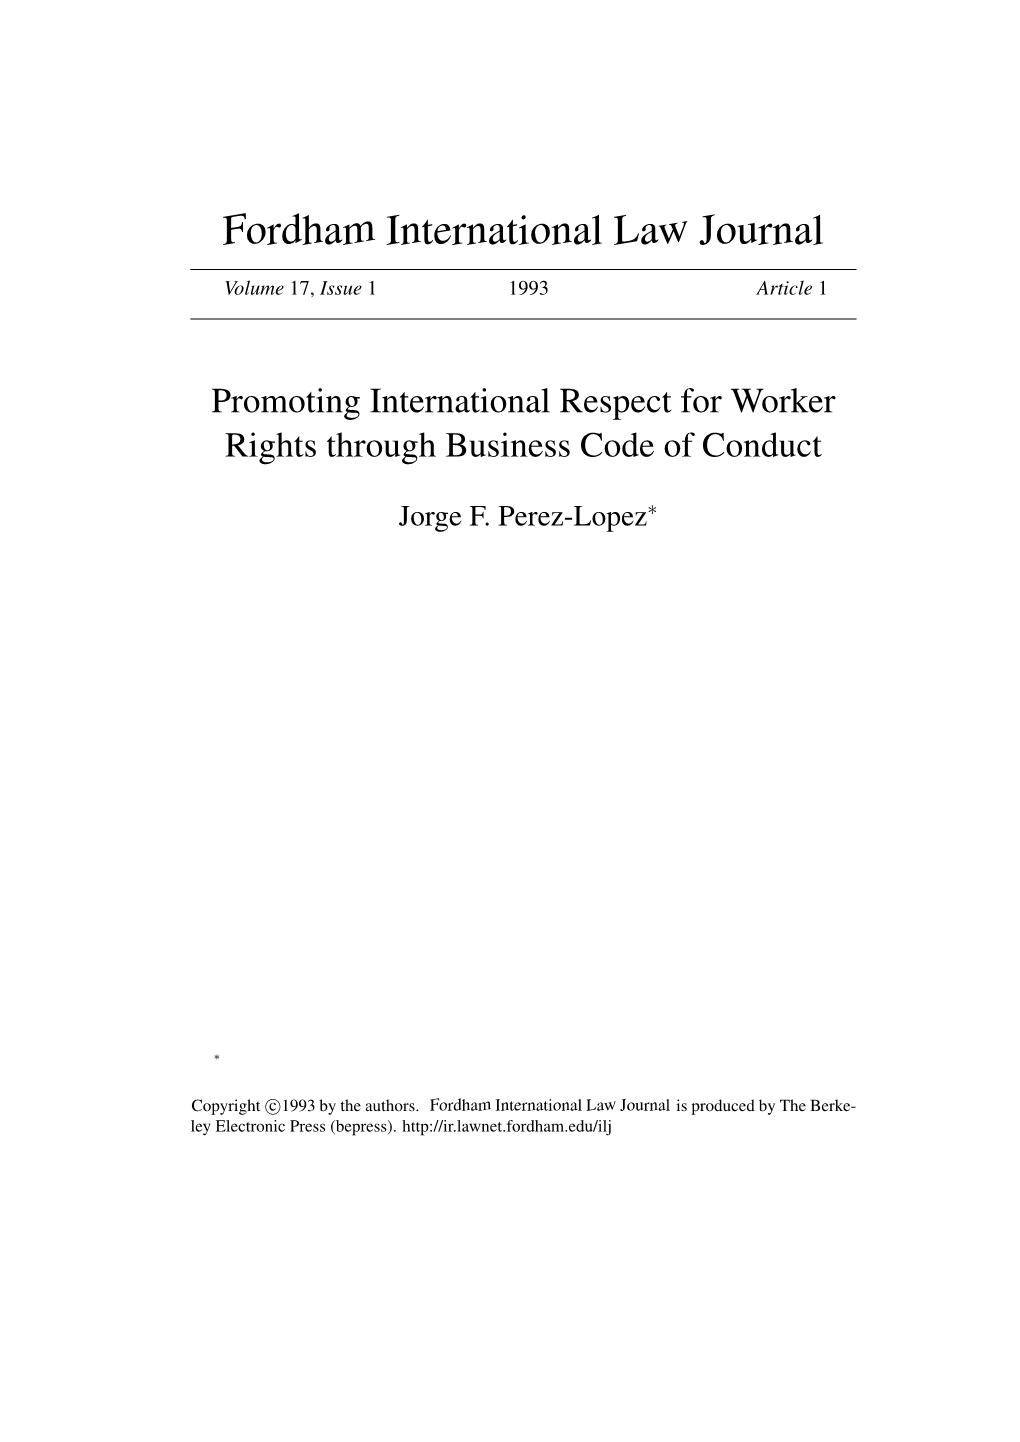 Promoting International Respect for Worker Rights Through Business Code of Conduct